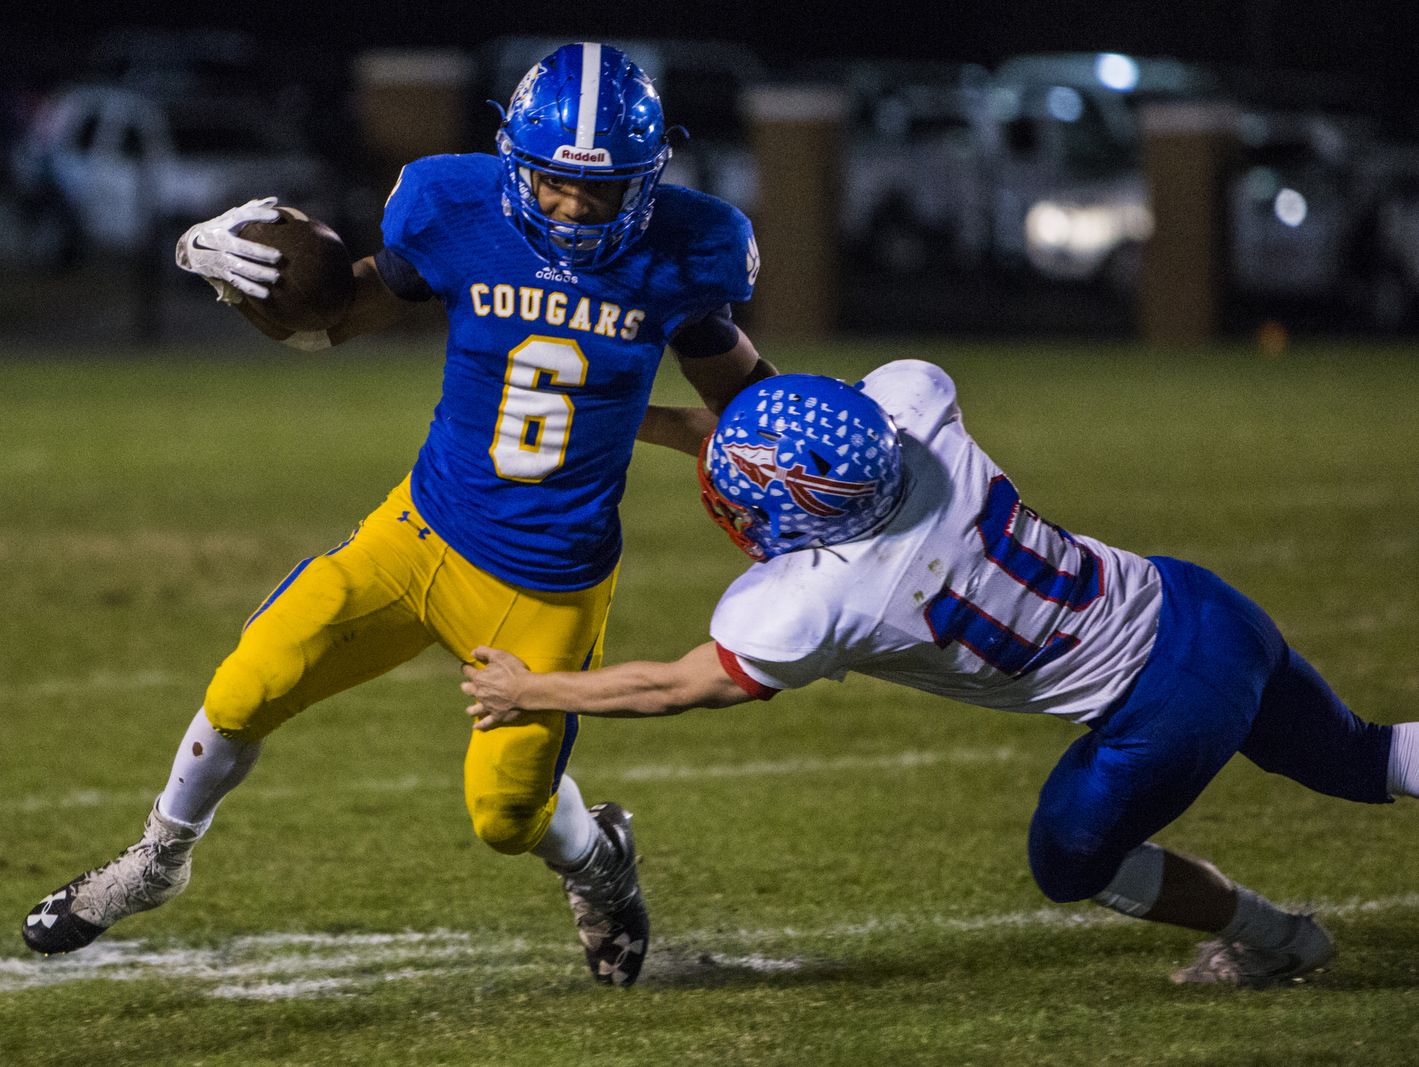 Jermaine Mason of Goodpasture Christian School runs past the Harpeth High School defense. The Cougers defeated the Indians 36-20